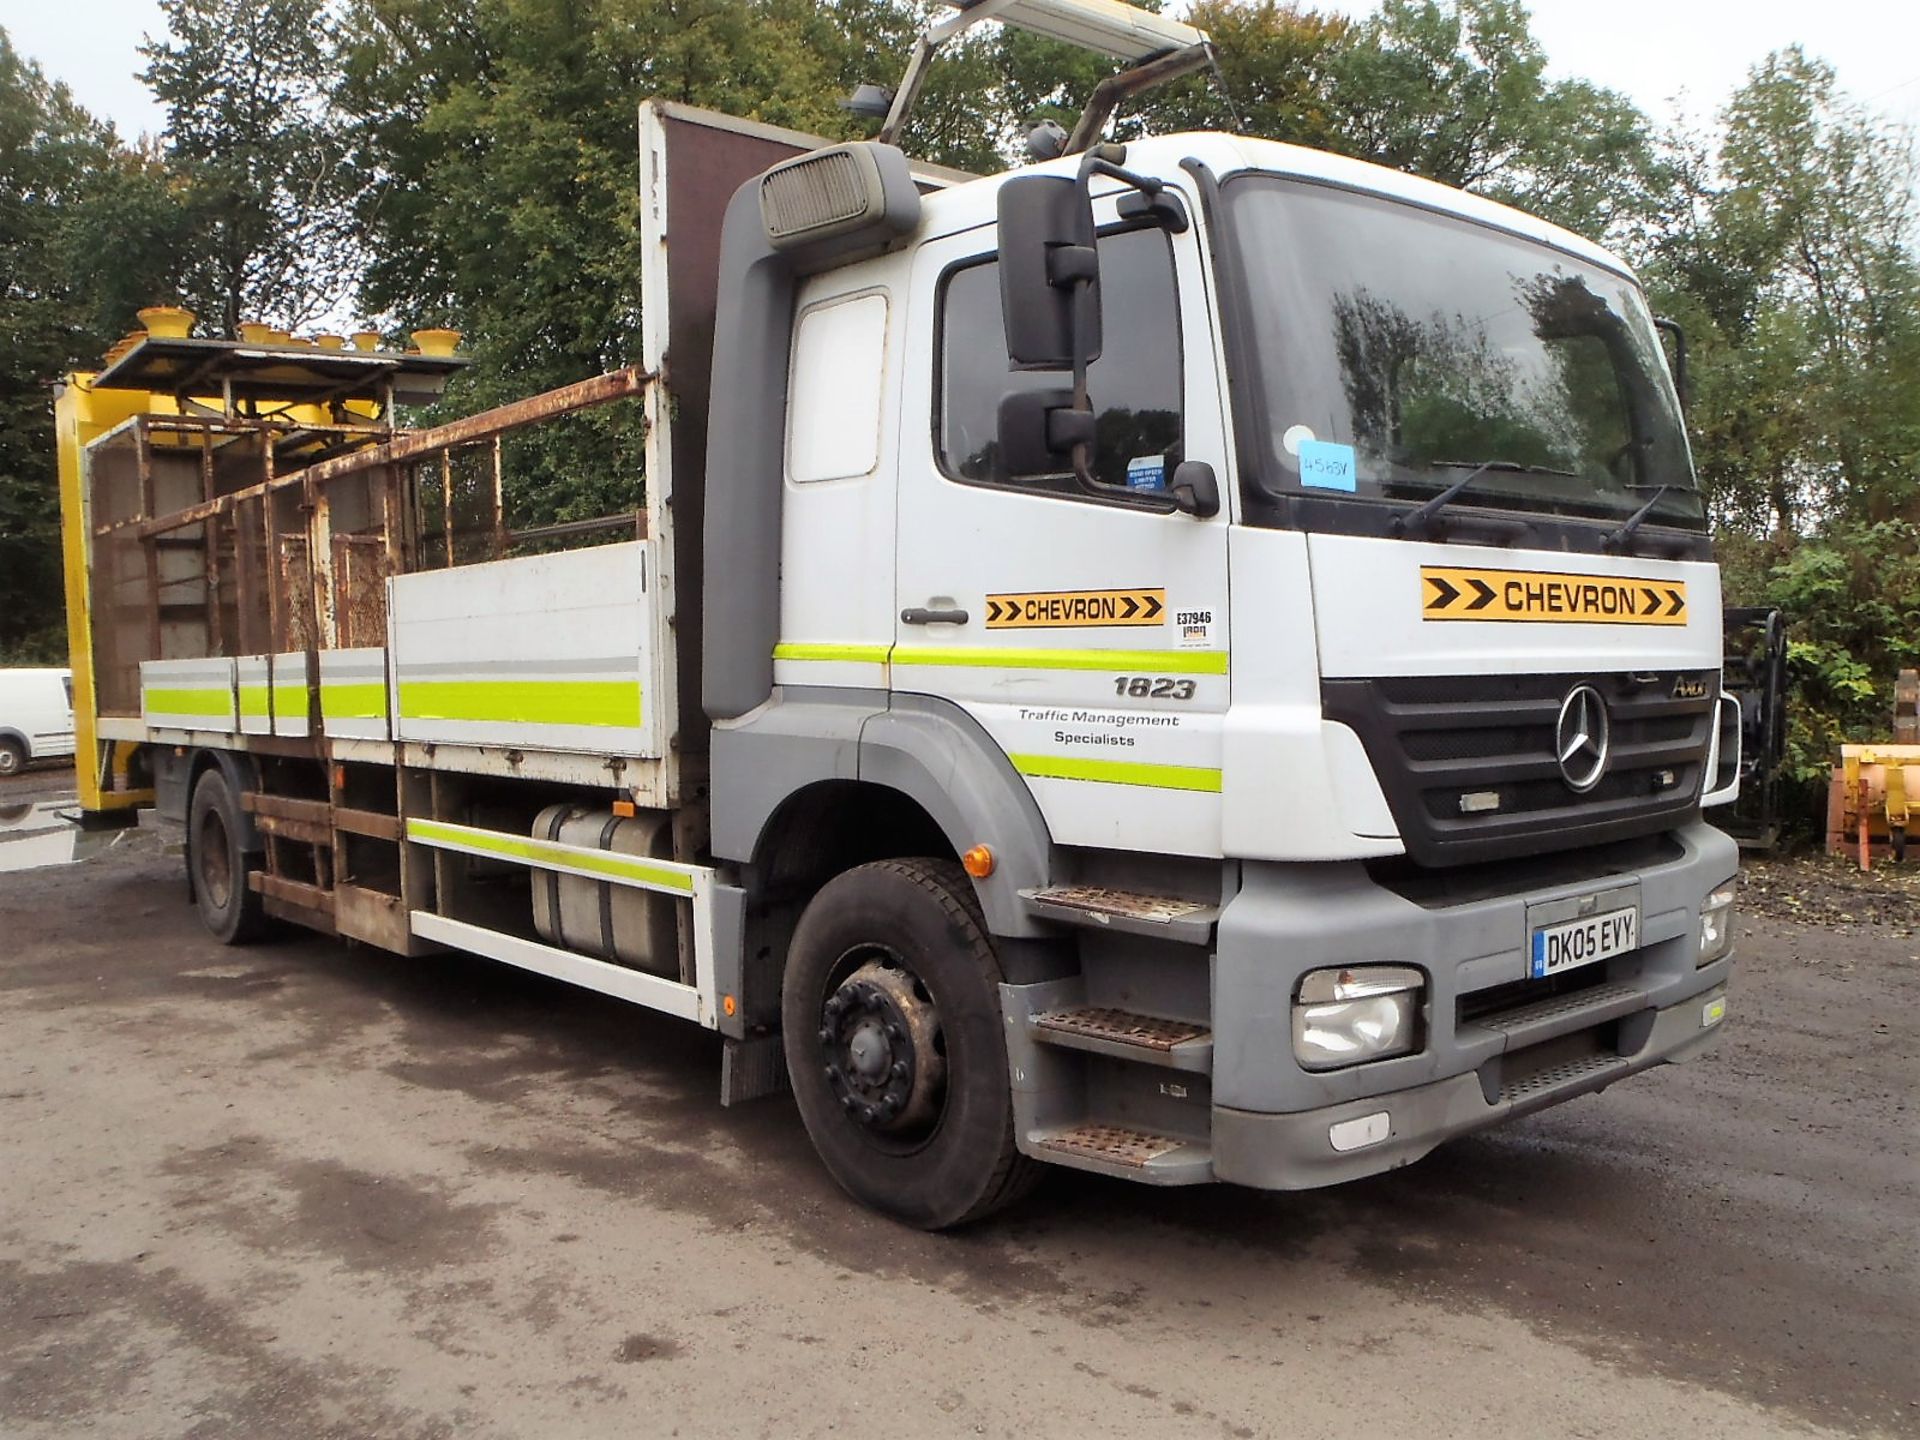 Mercedes Benz 1823 18 tonne flat bed impact protection lorry Registration Number: DK05 EVY Date of